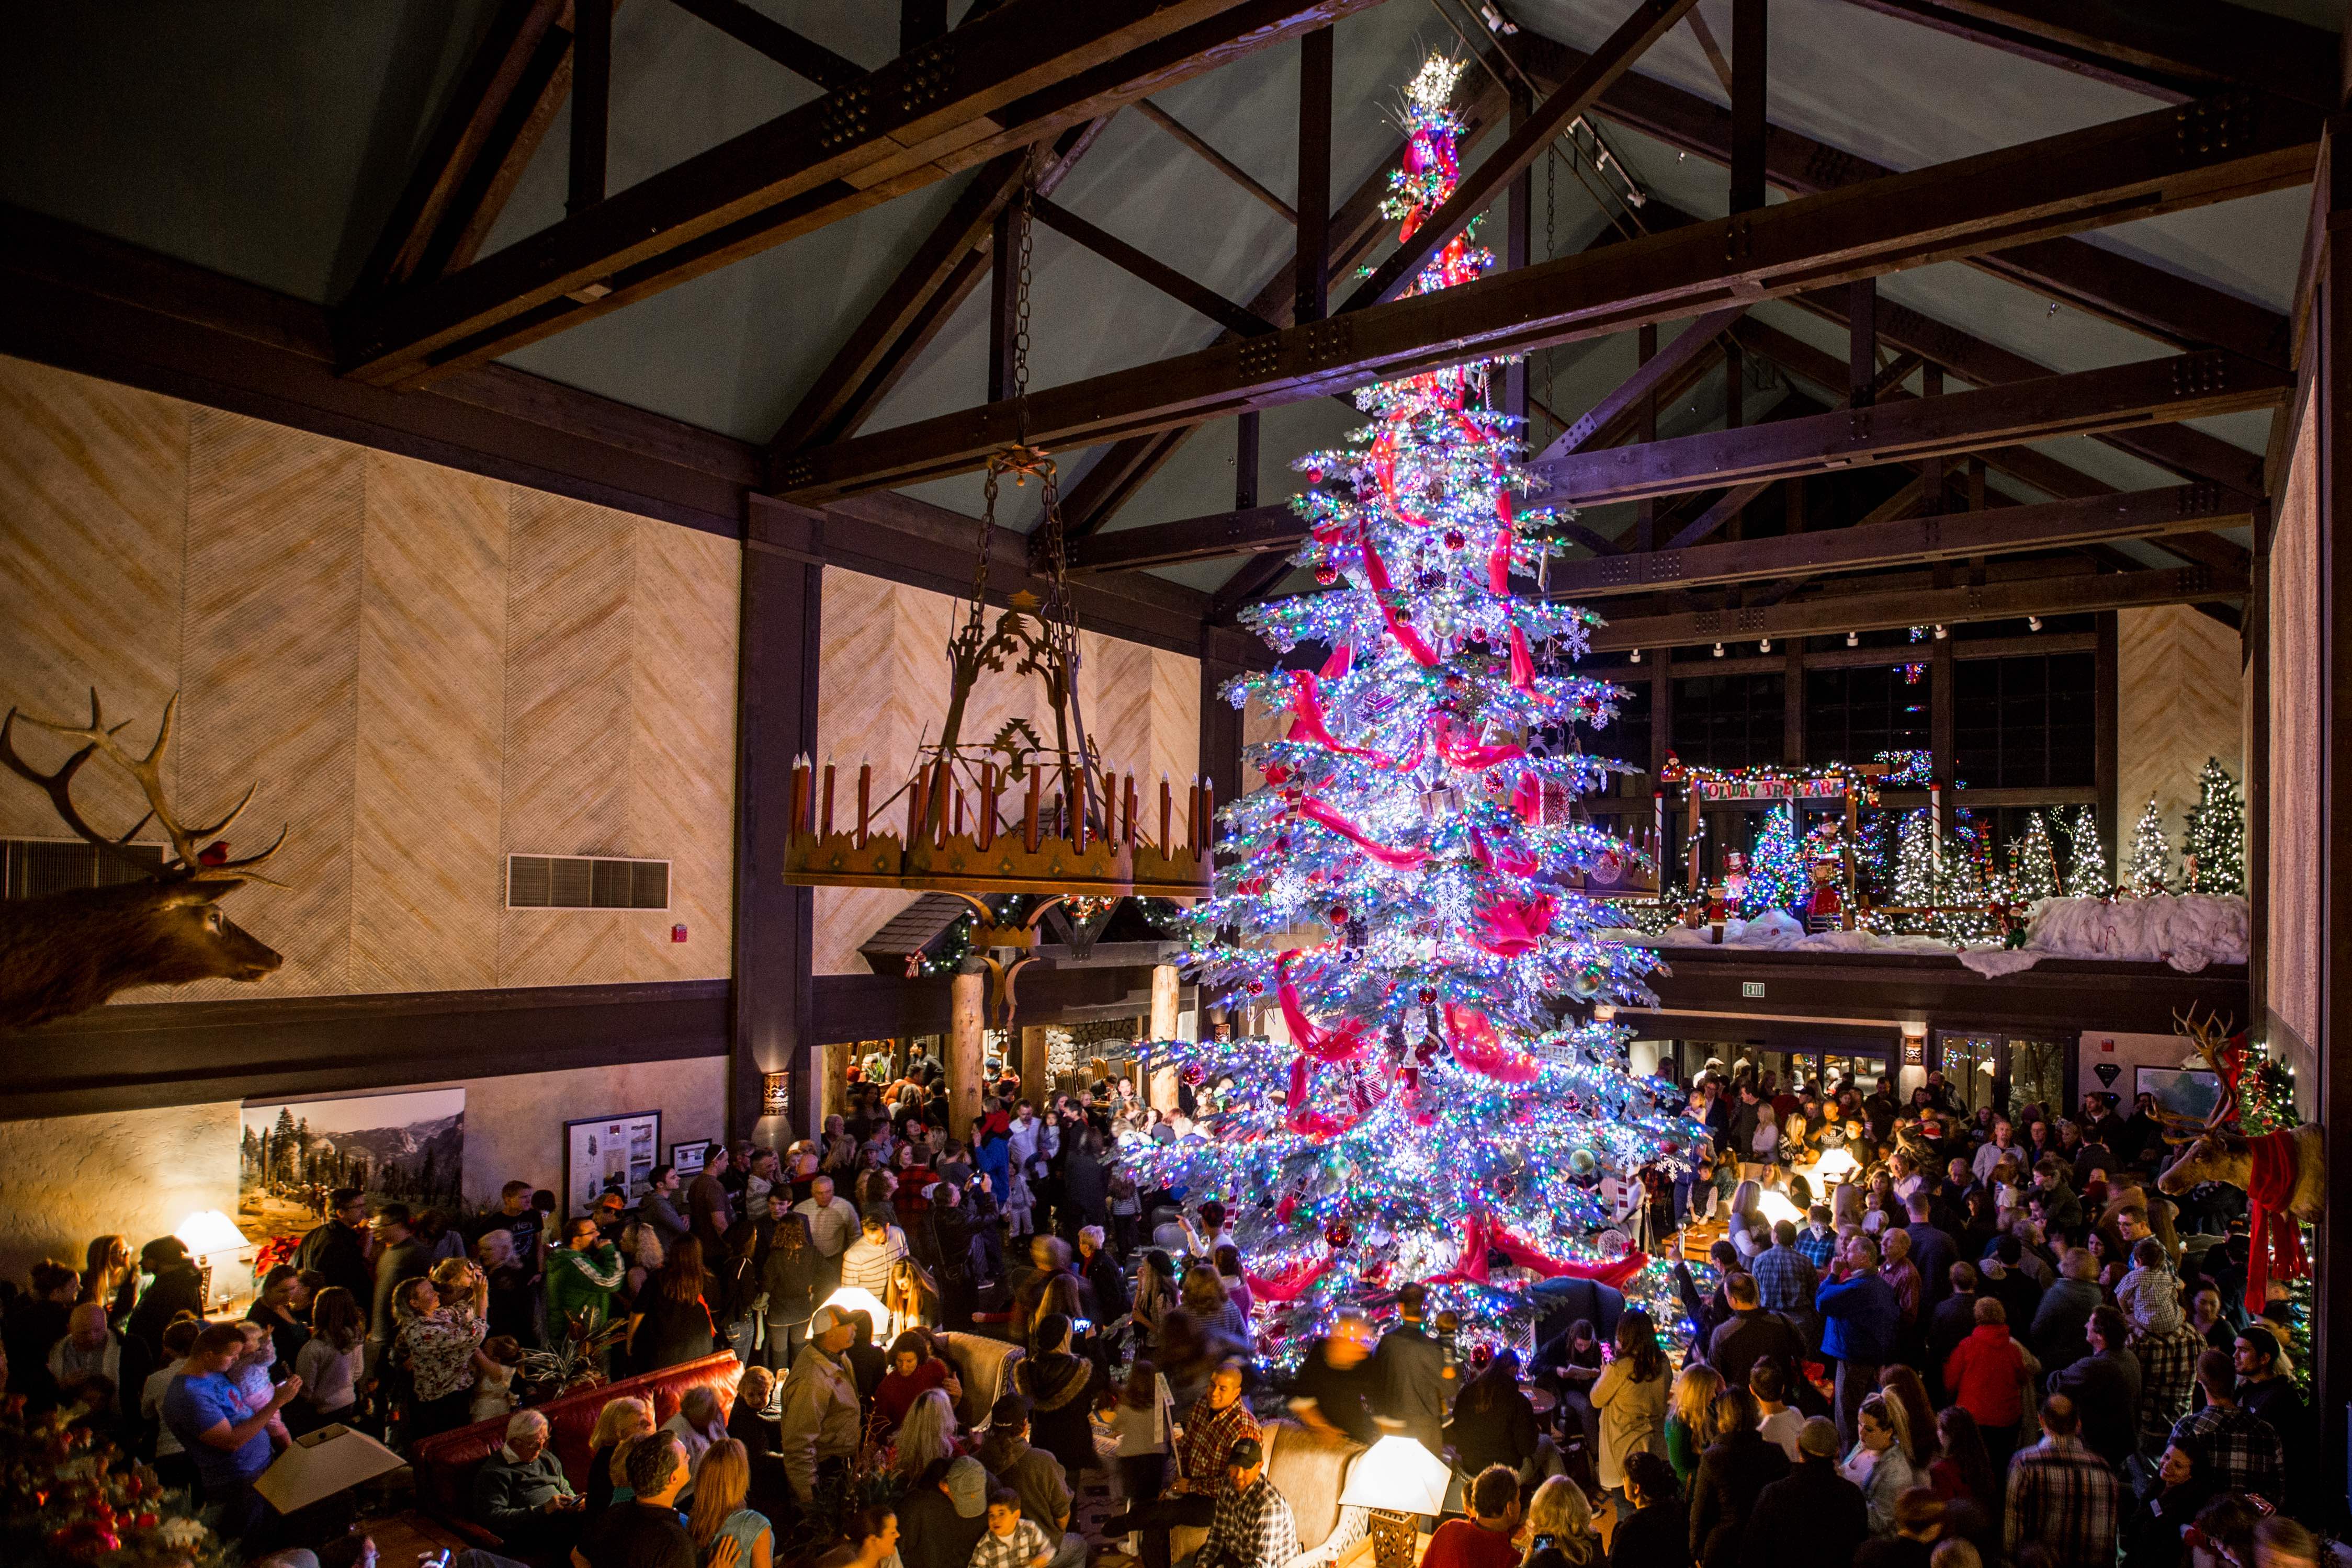 Tenaya's 35-foot holiday tree is sustainably harvested and among the tallest in California's Central Valley.